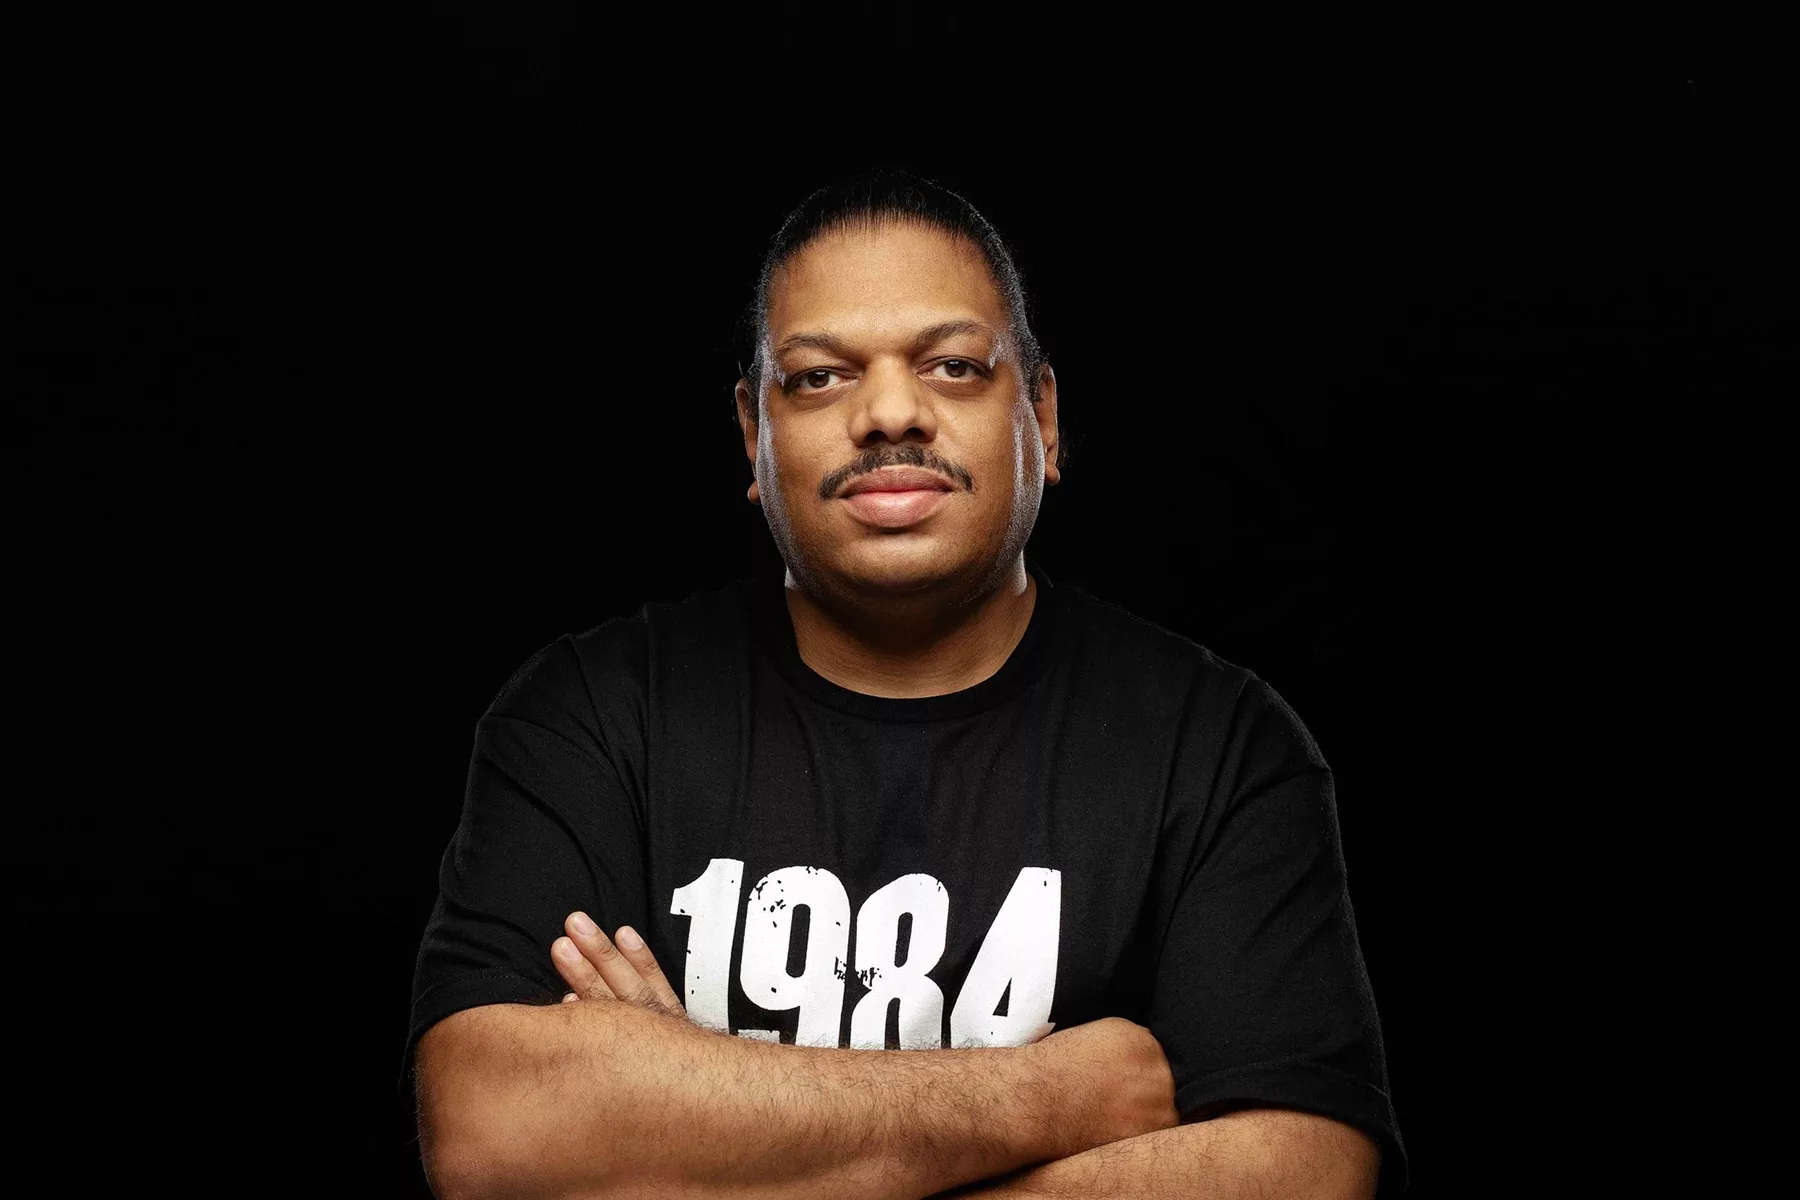 Kerri Chandler shares 73 free tracks to honor his late father